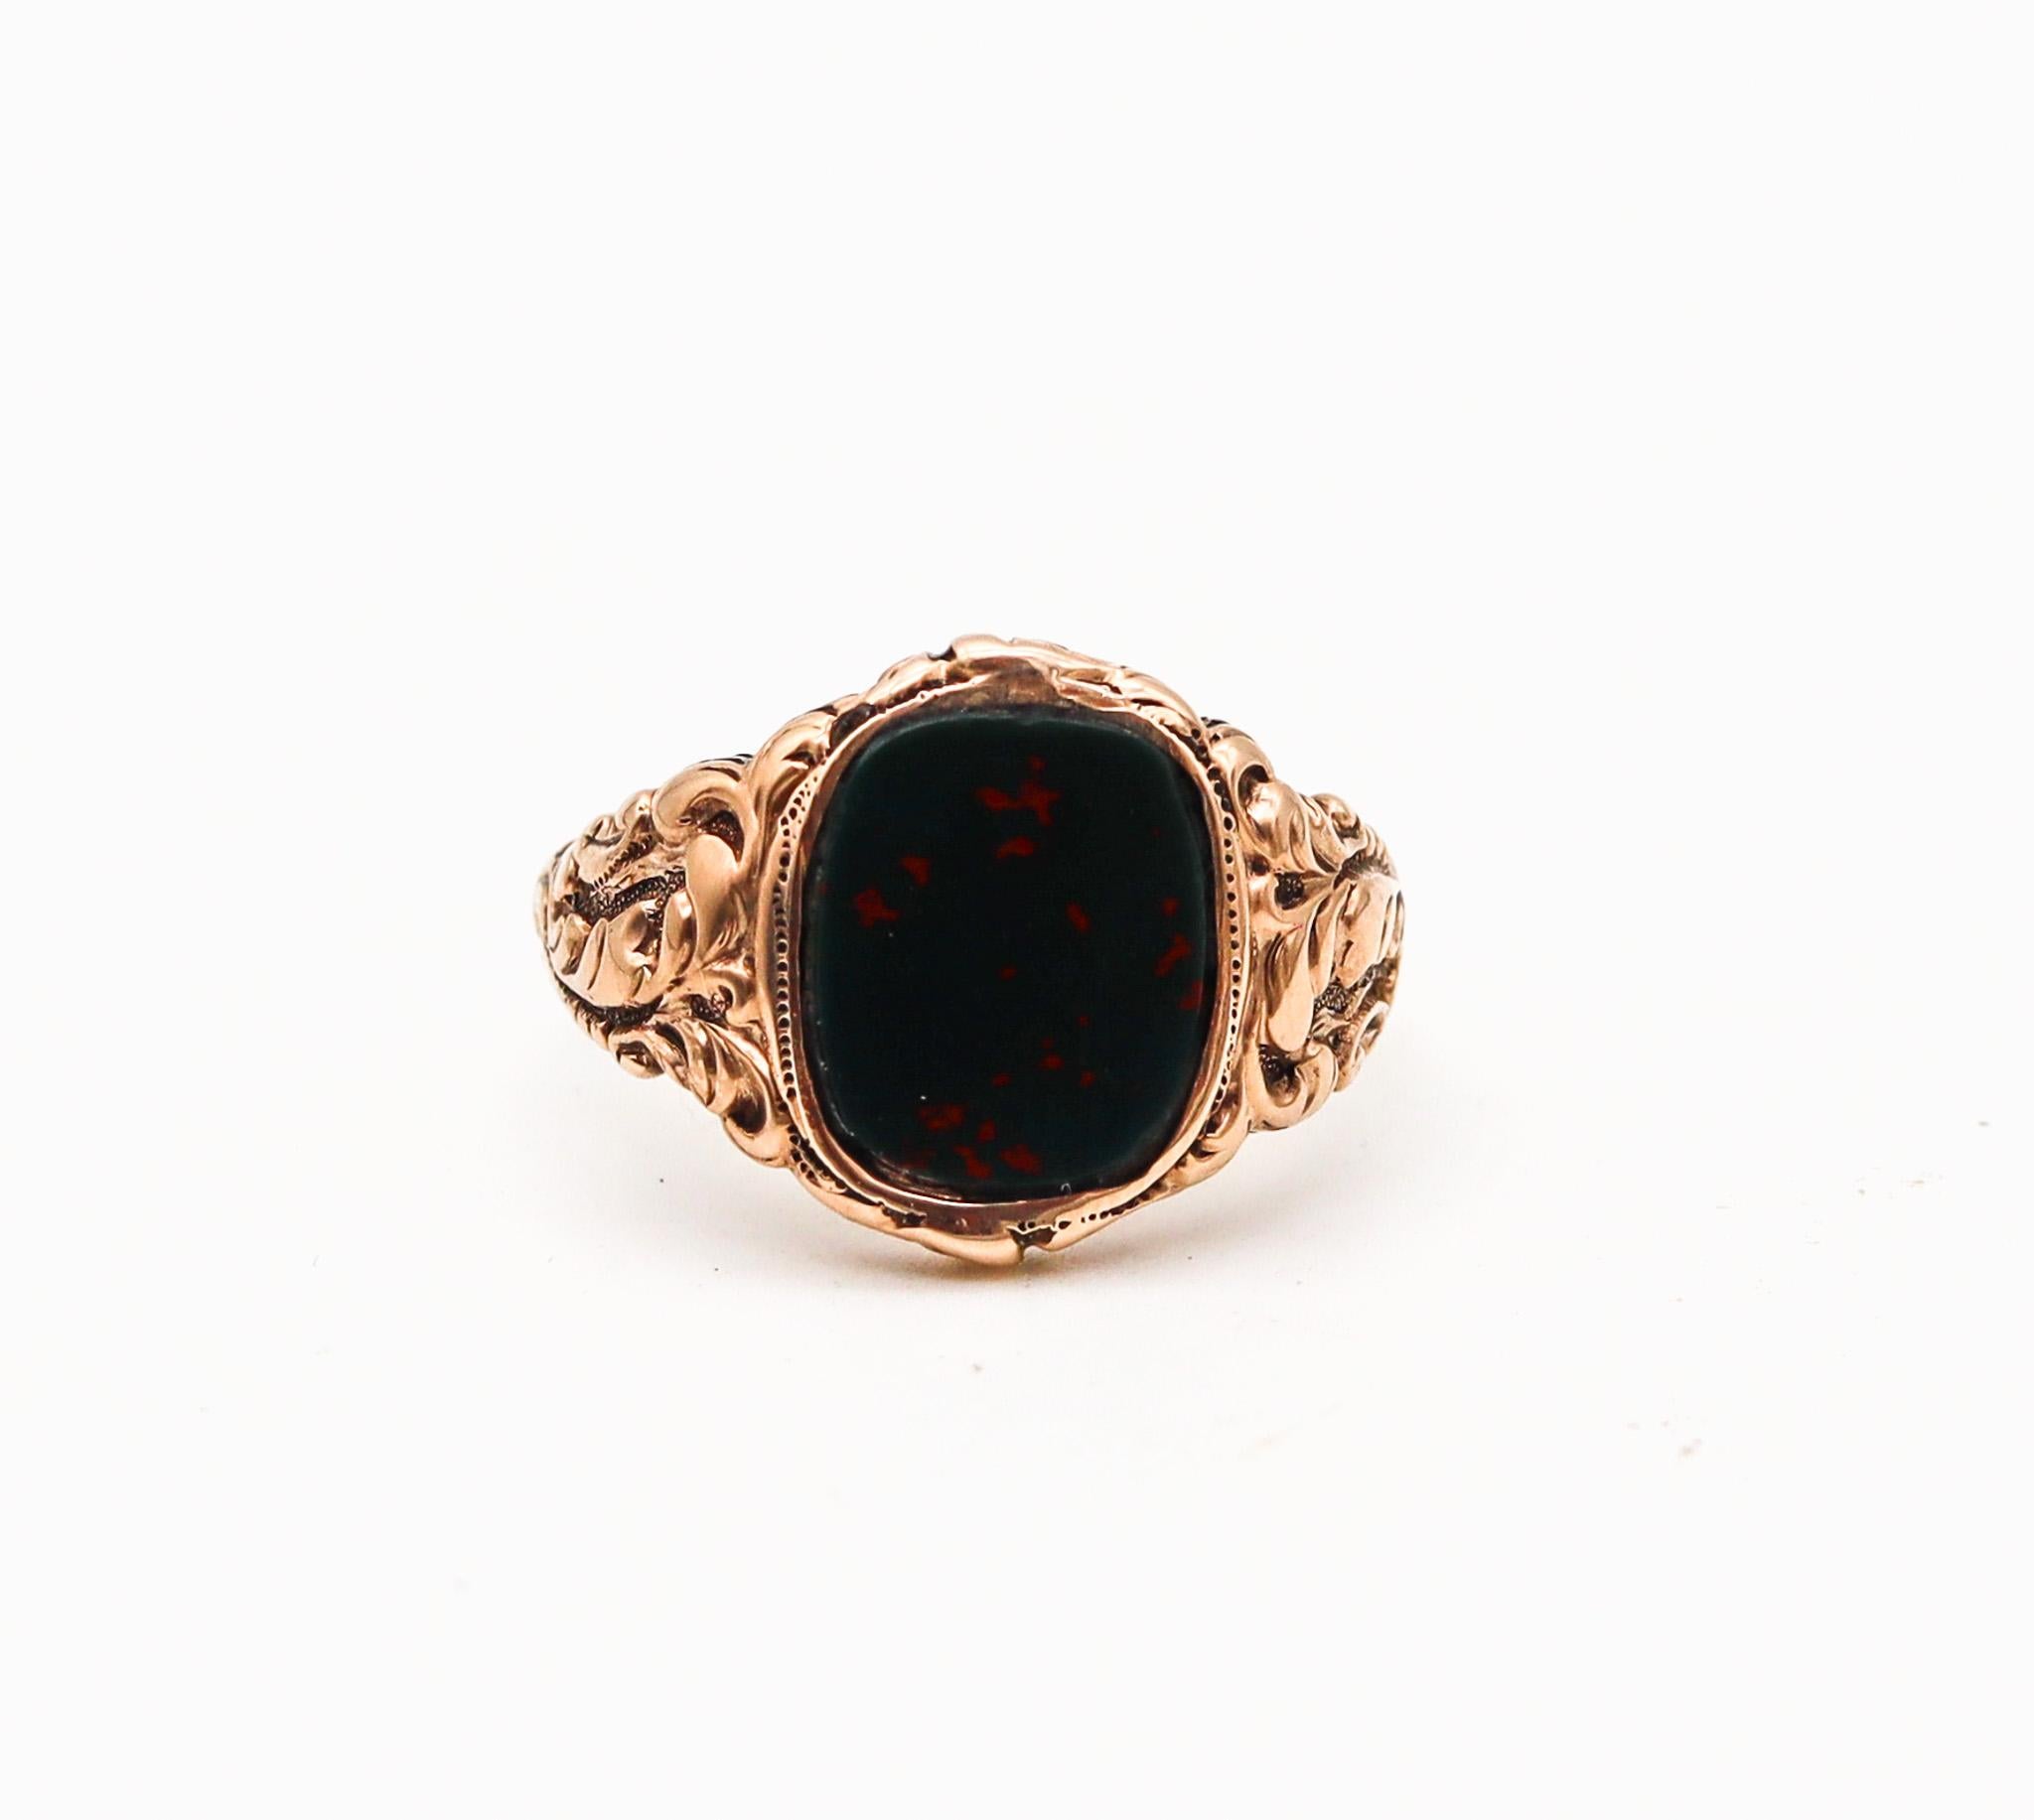 Cabochon Allsopp-Steller 1900 Art Nouveau Signet Ring In 18Kt Gold With Oval Bloodstone For Sale